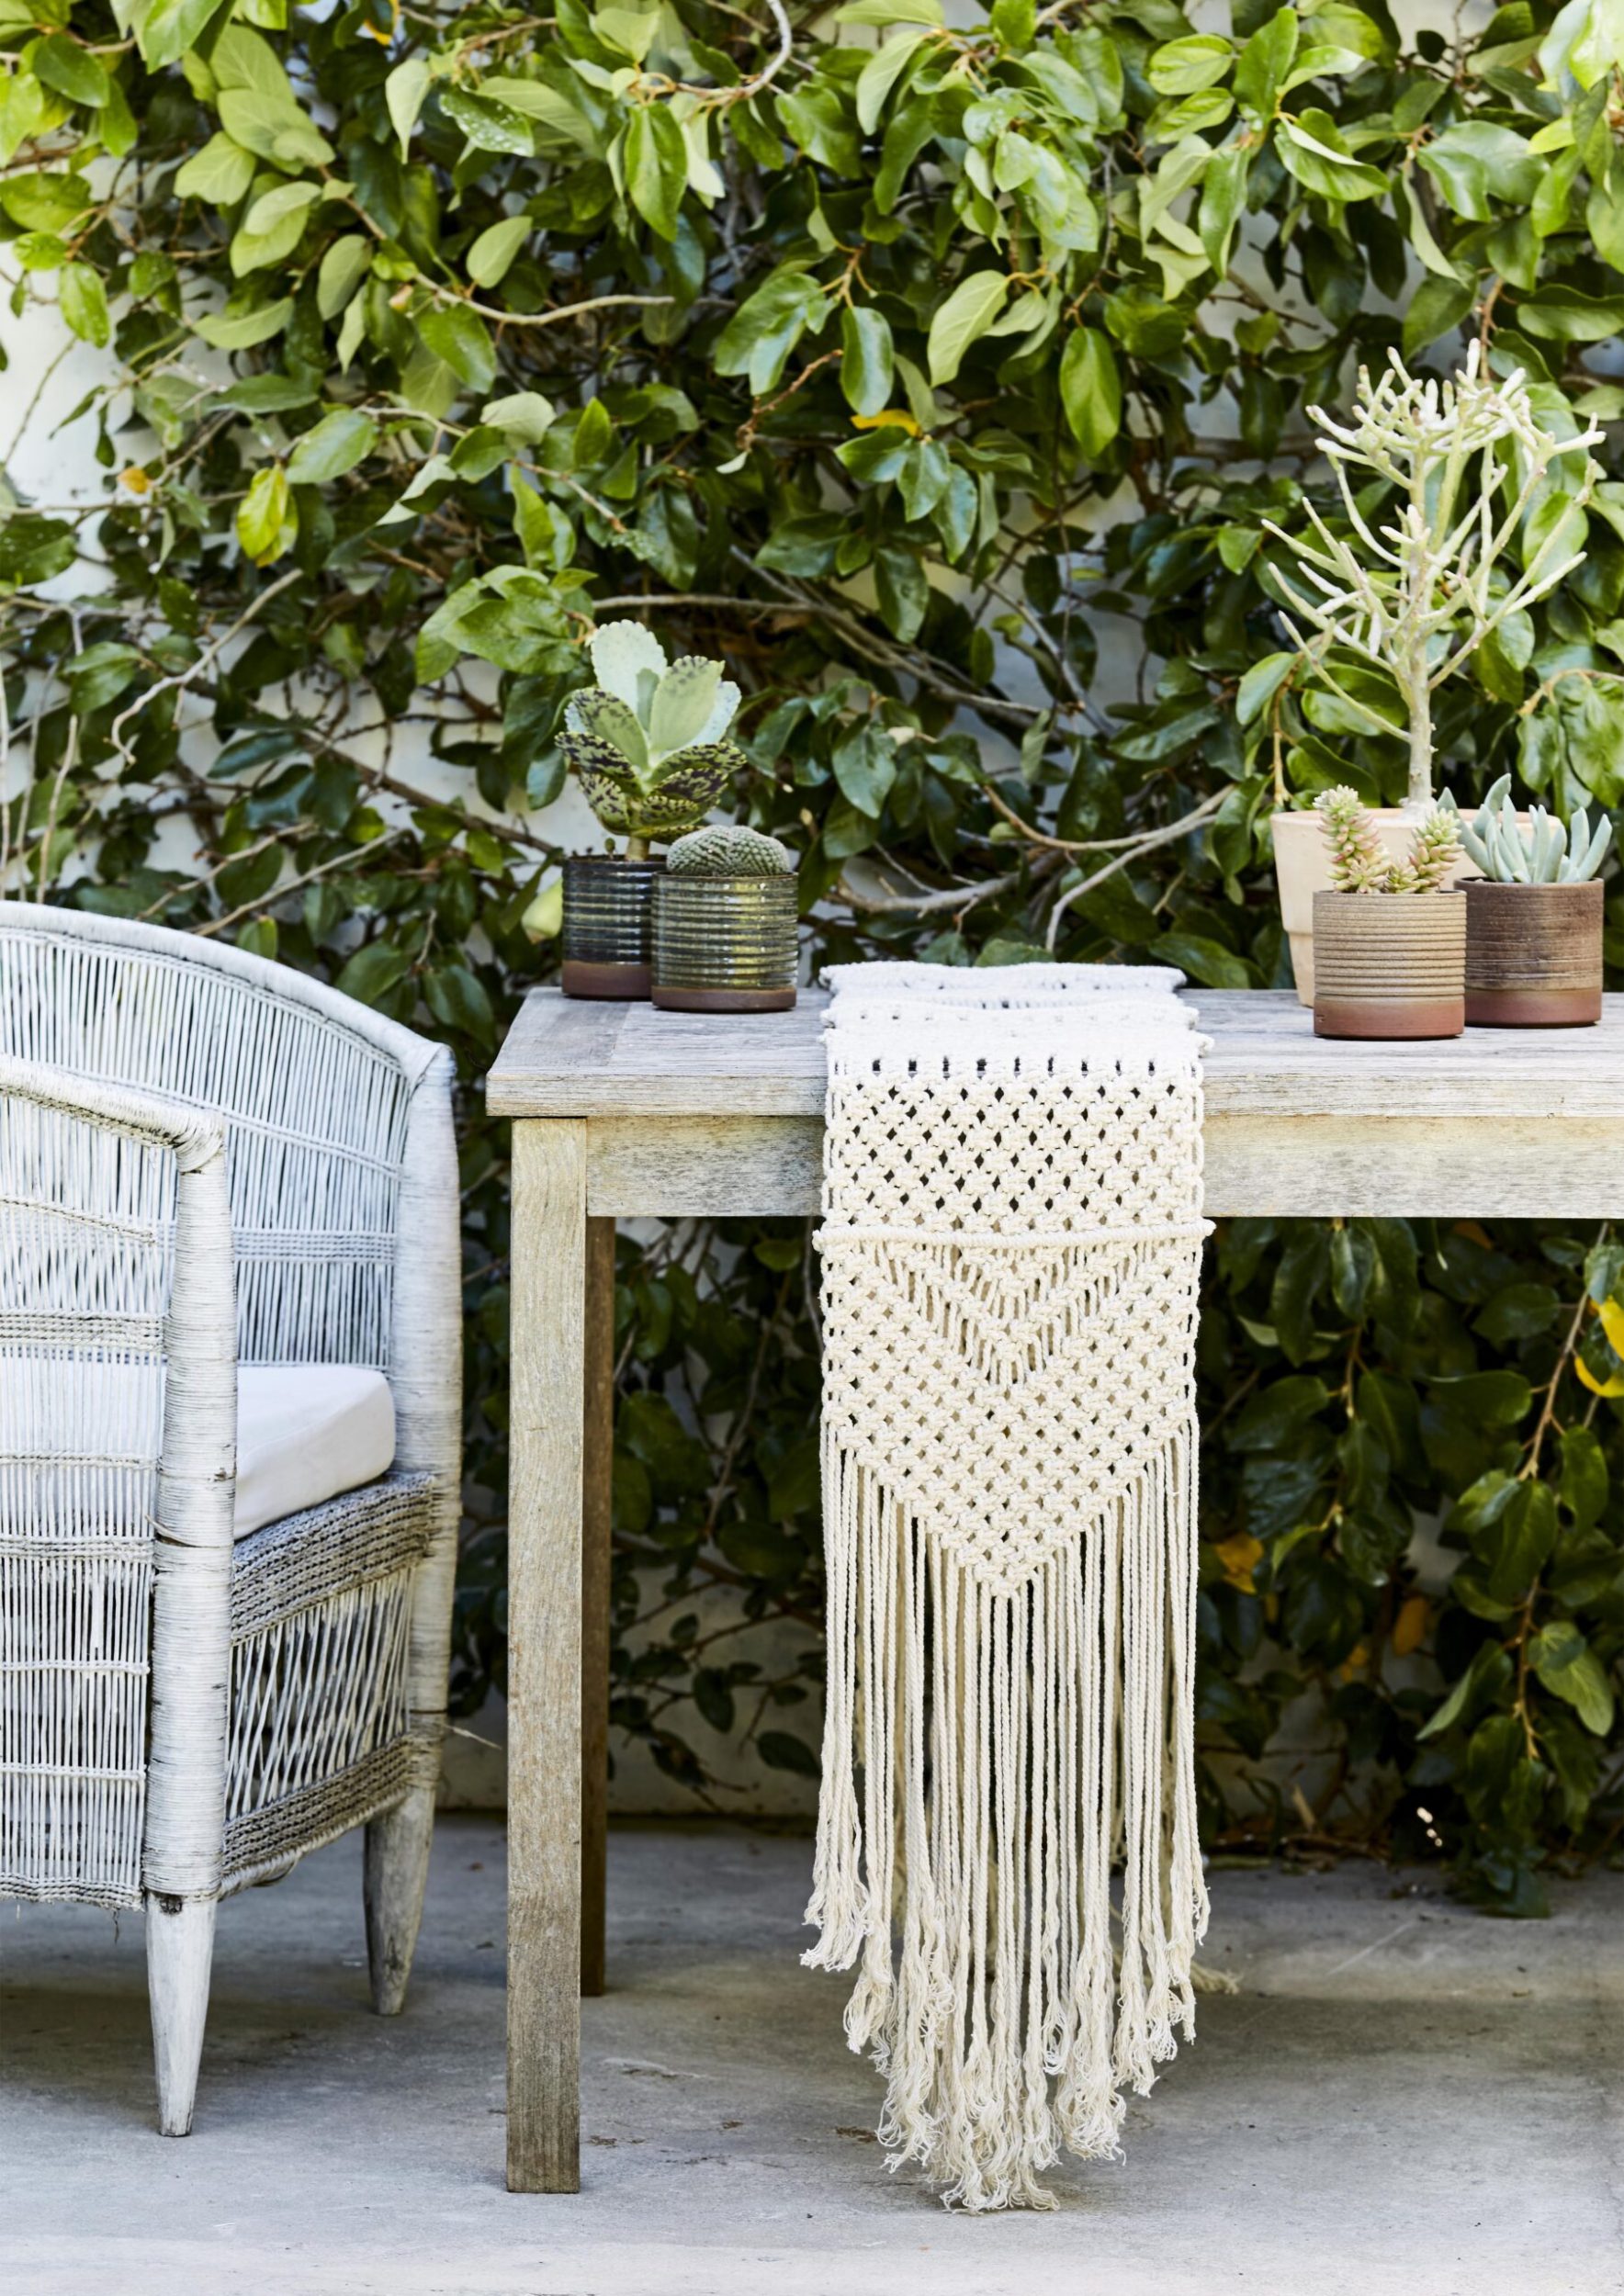 Outdoor table with macramé table runner and cane chair